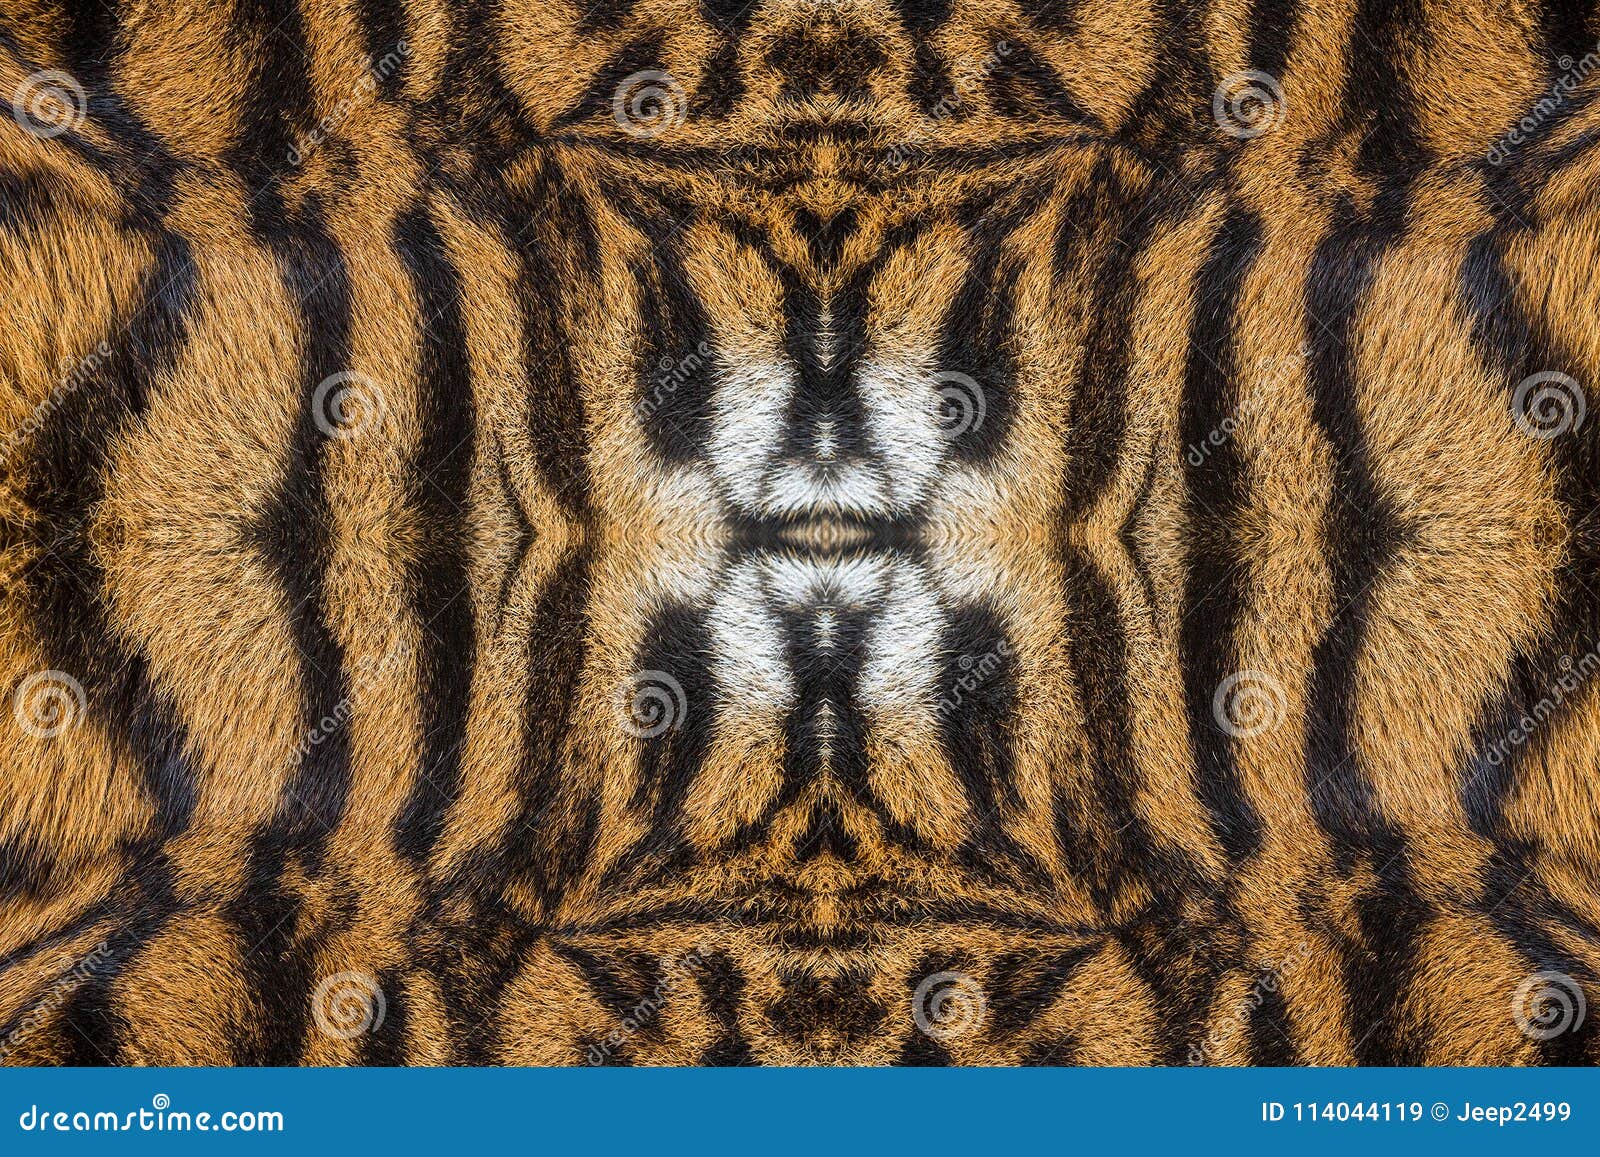 Patterned and Texture of Tiger. Stock Image - Image of striped, eyes ...